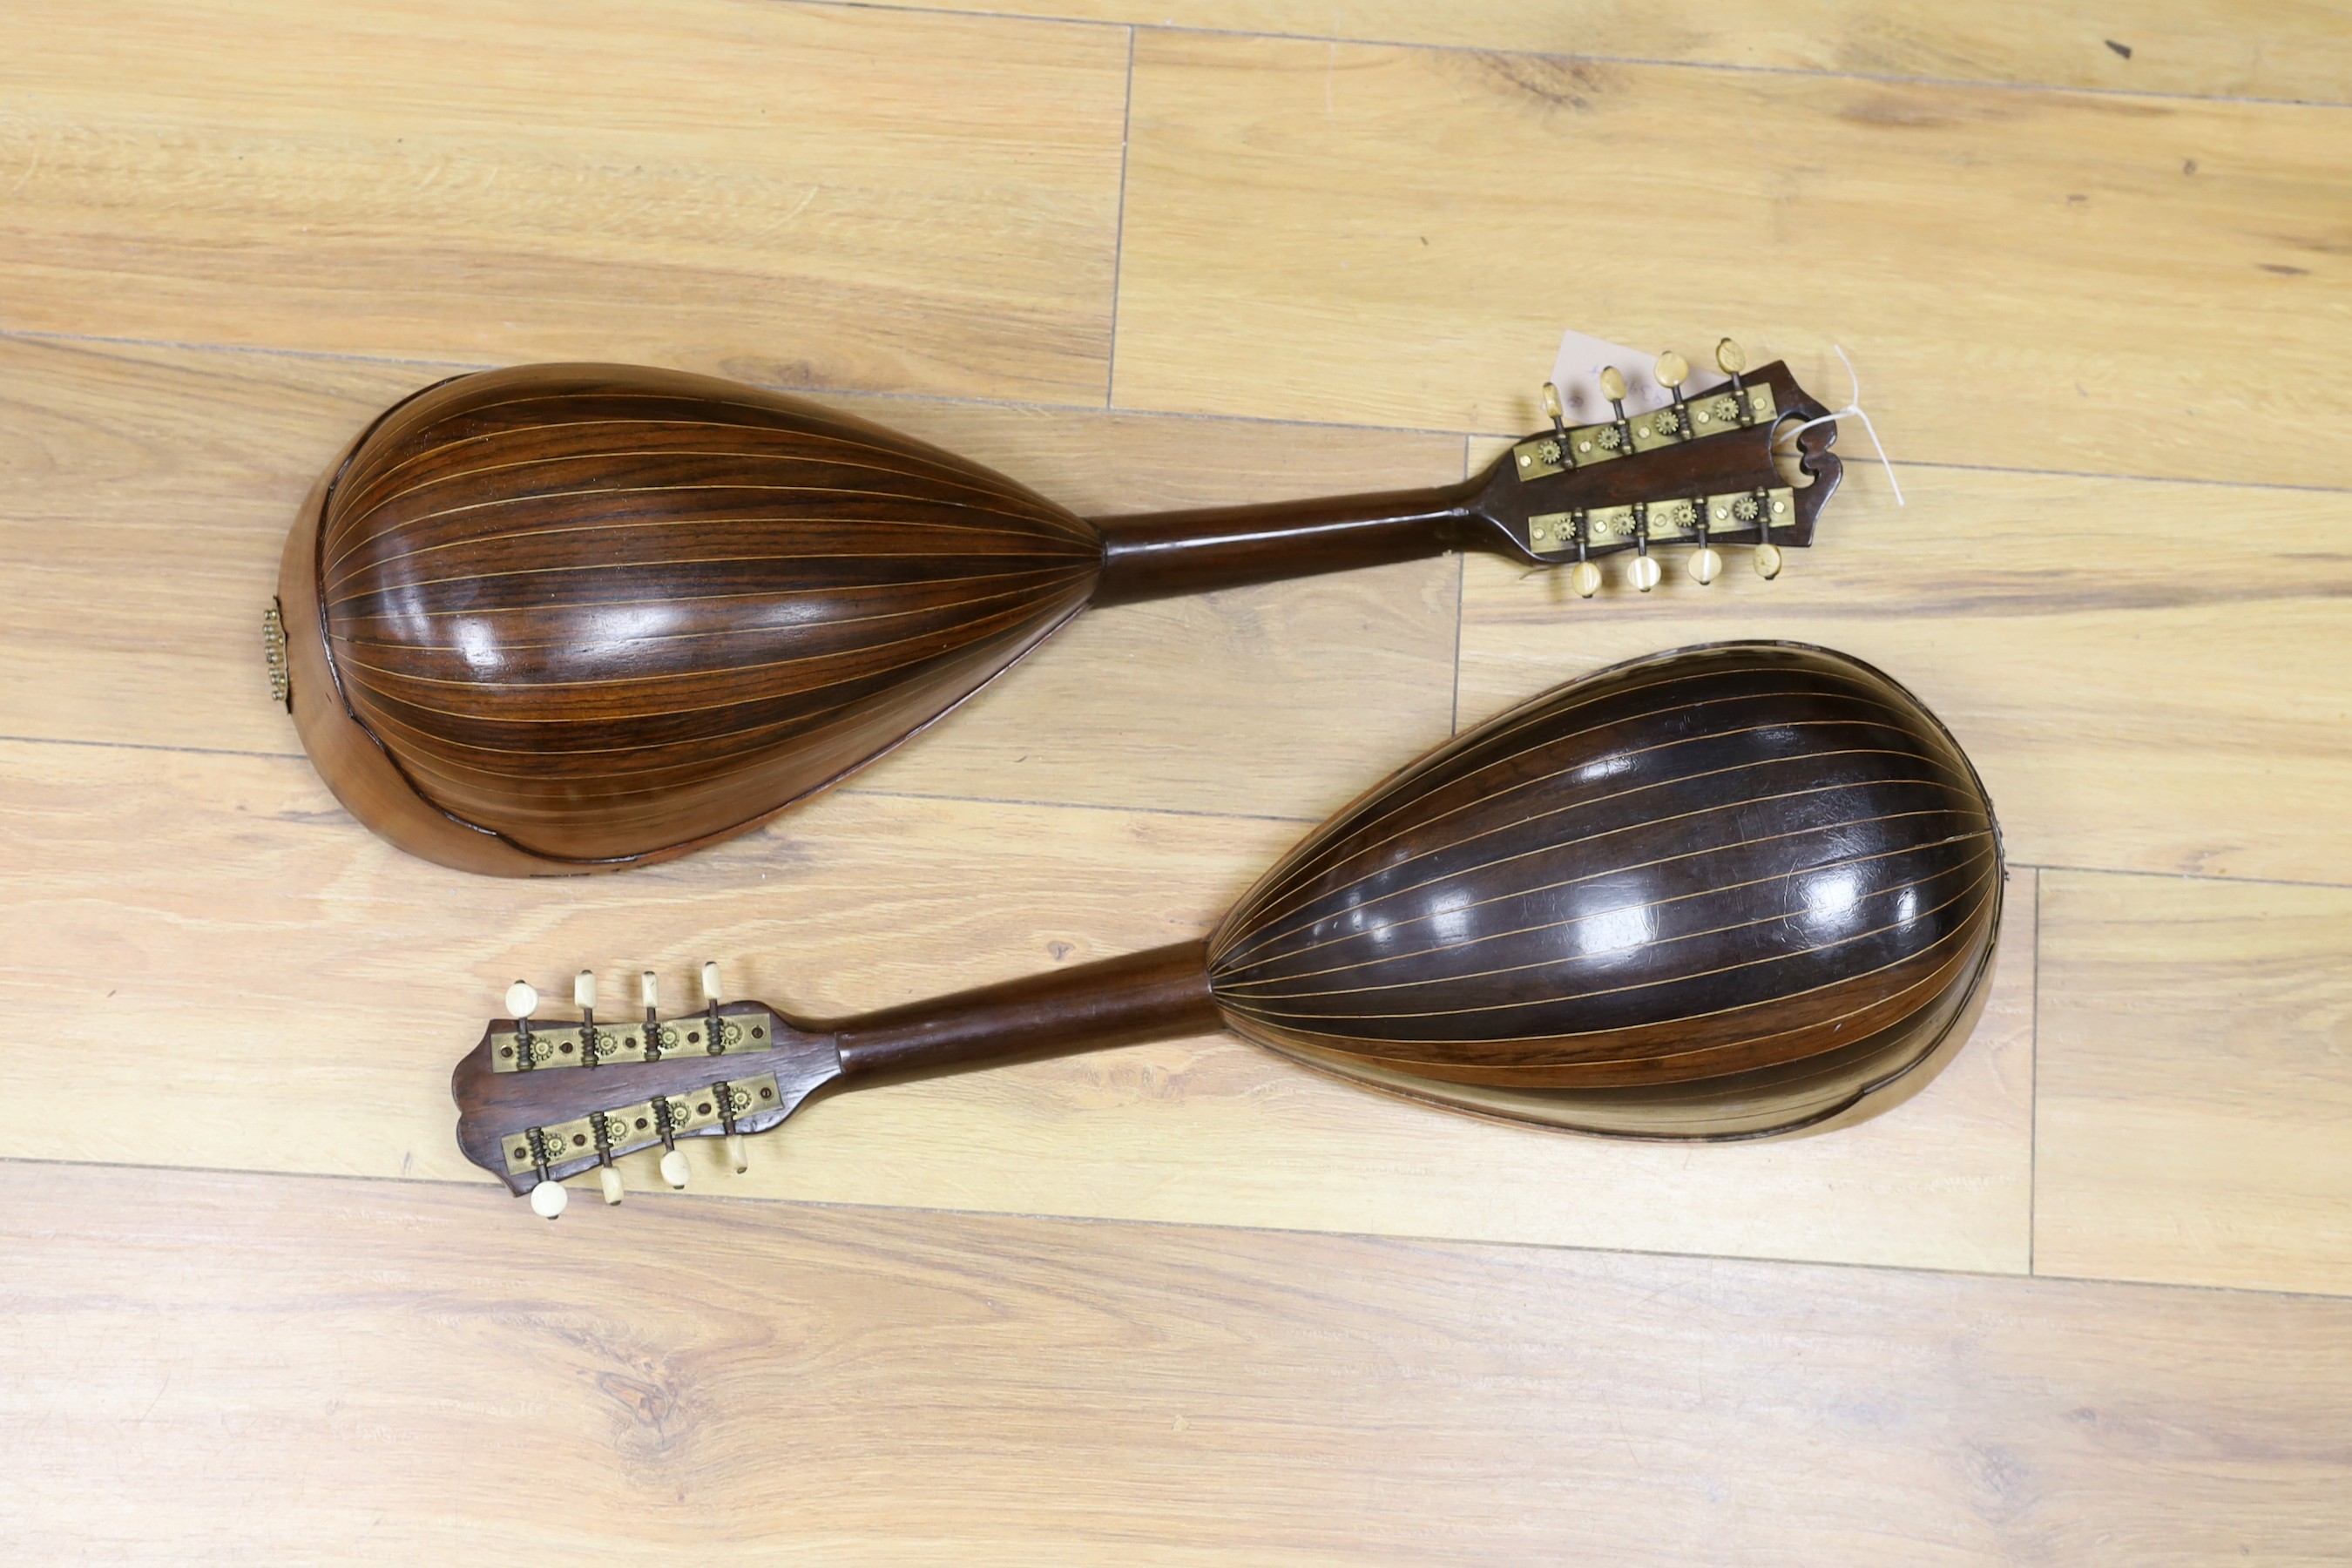 Two mandolins, with mother of pearl and tortoiseshell inlay, 57ms long, bone mounts